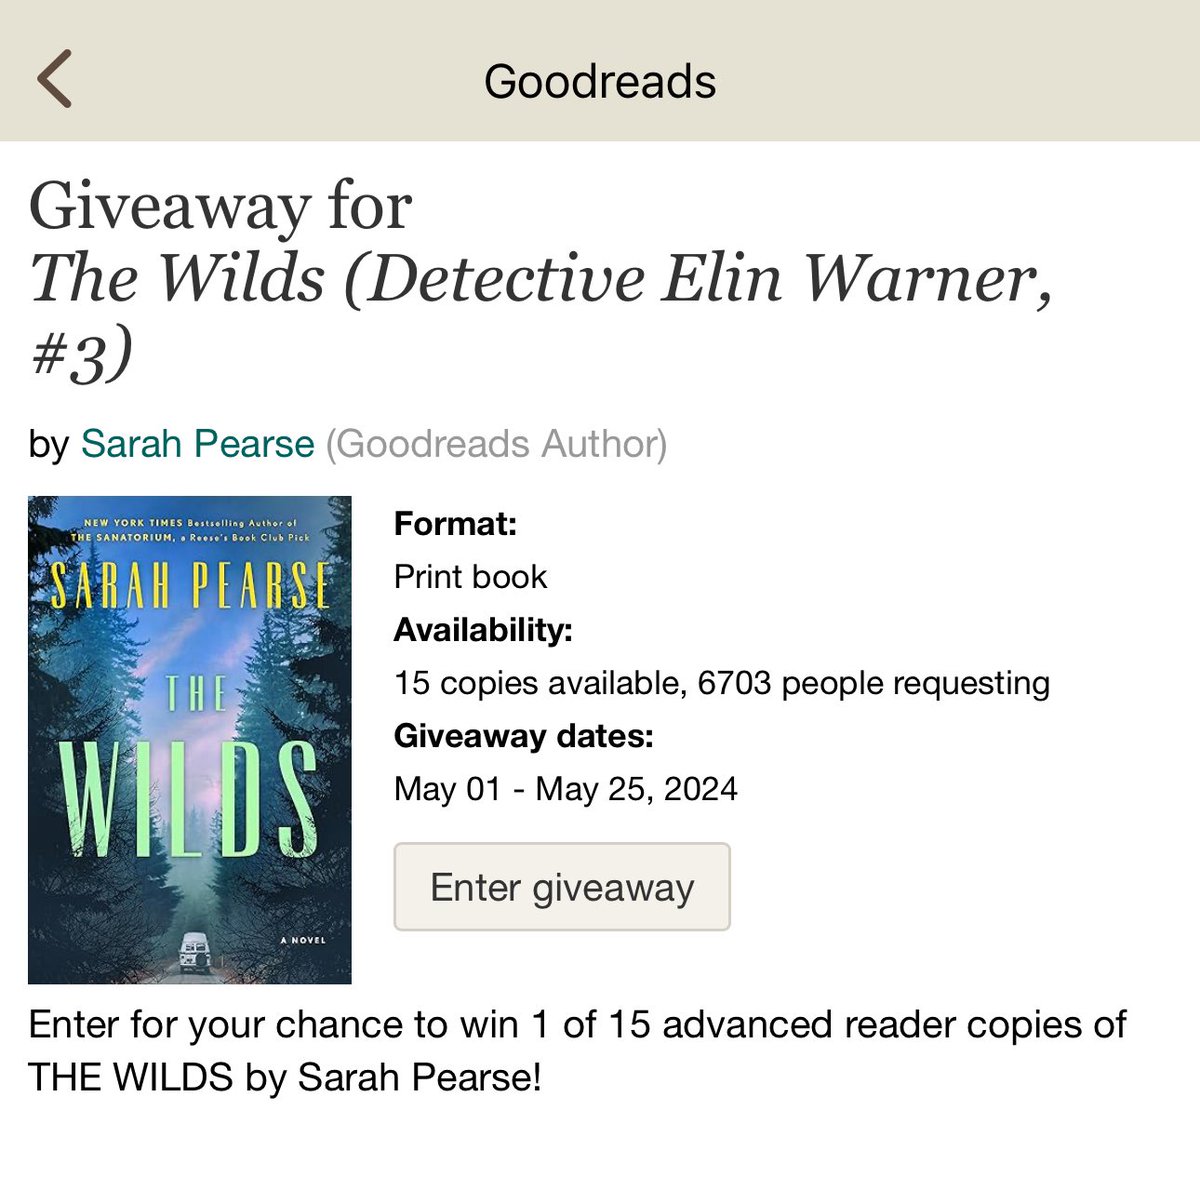 ✨ GOODREADS GIVEAWAY! ✨ US Readers - through May there is an @goodreads Giveaway of #TheWilds. Click here to enter: goodreads.com/giveaway/show/…